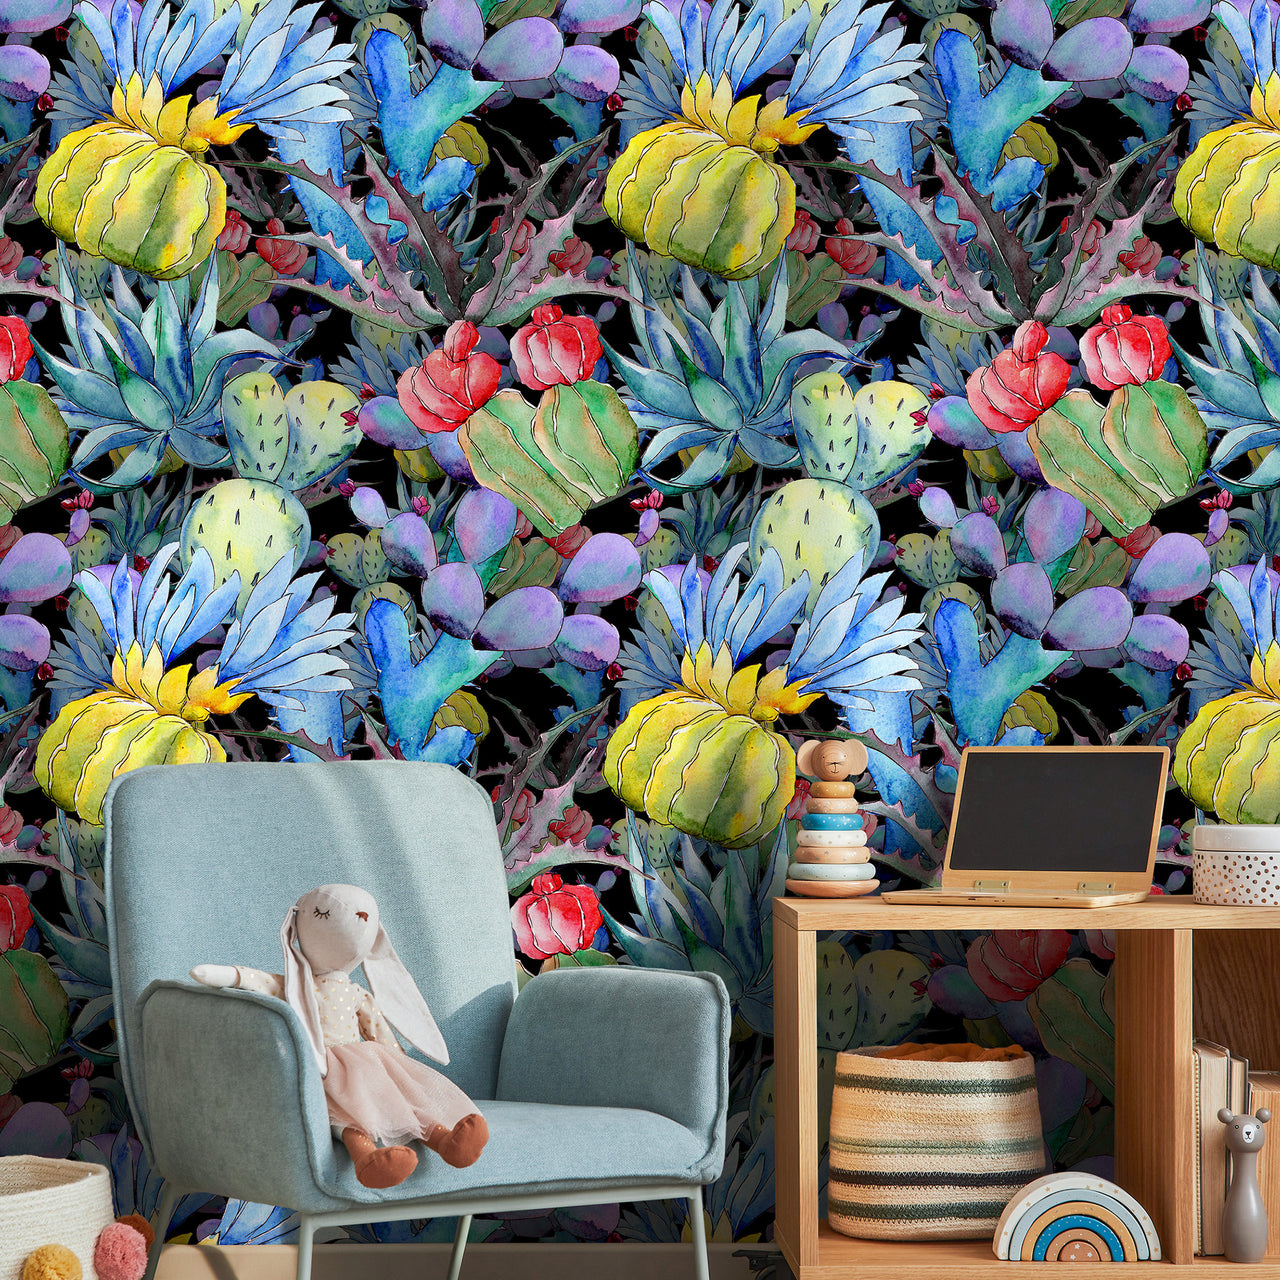 Wallpaper Peel and Stick Wallpaper Removable Wallpaper Home Decor Wall Art Wall Decor Room Decor / Colorful Floral Cactus Wallpaper - B009